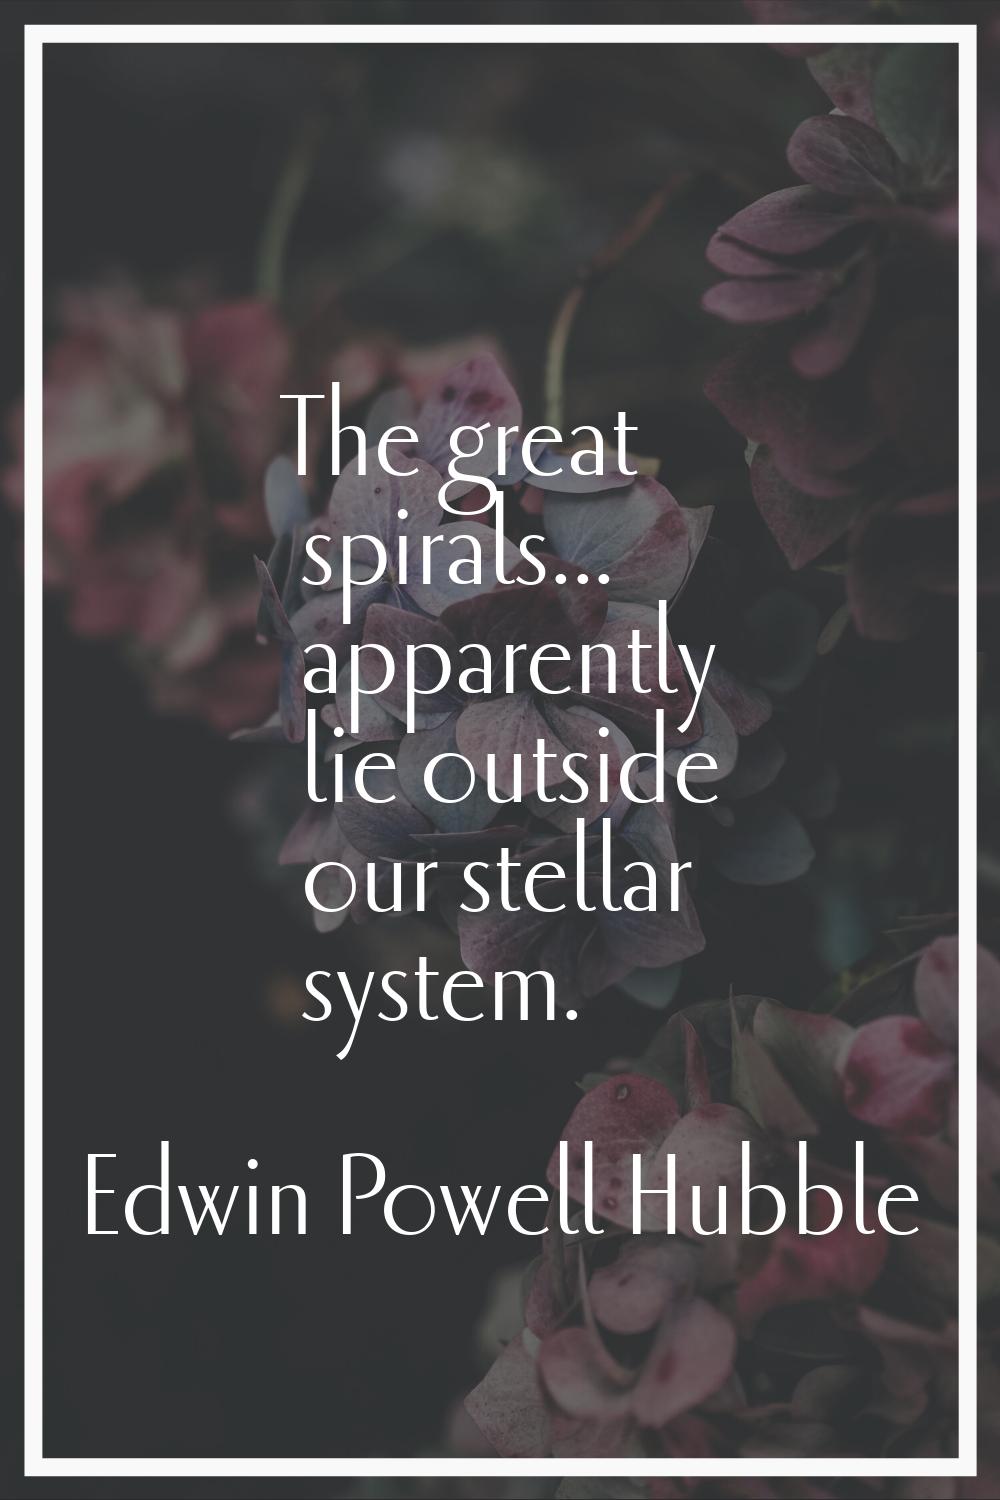 The great spirals... apparently lie outside our stellar system.